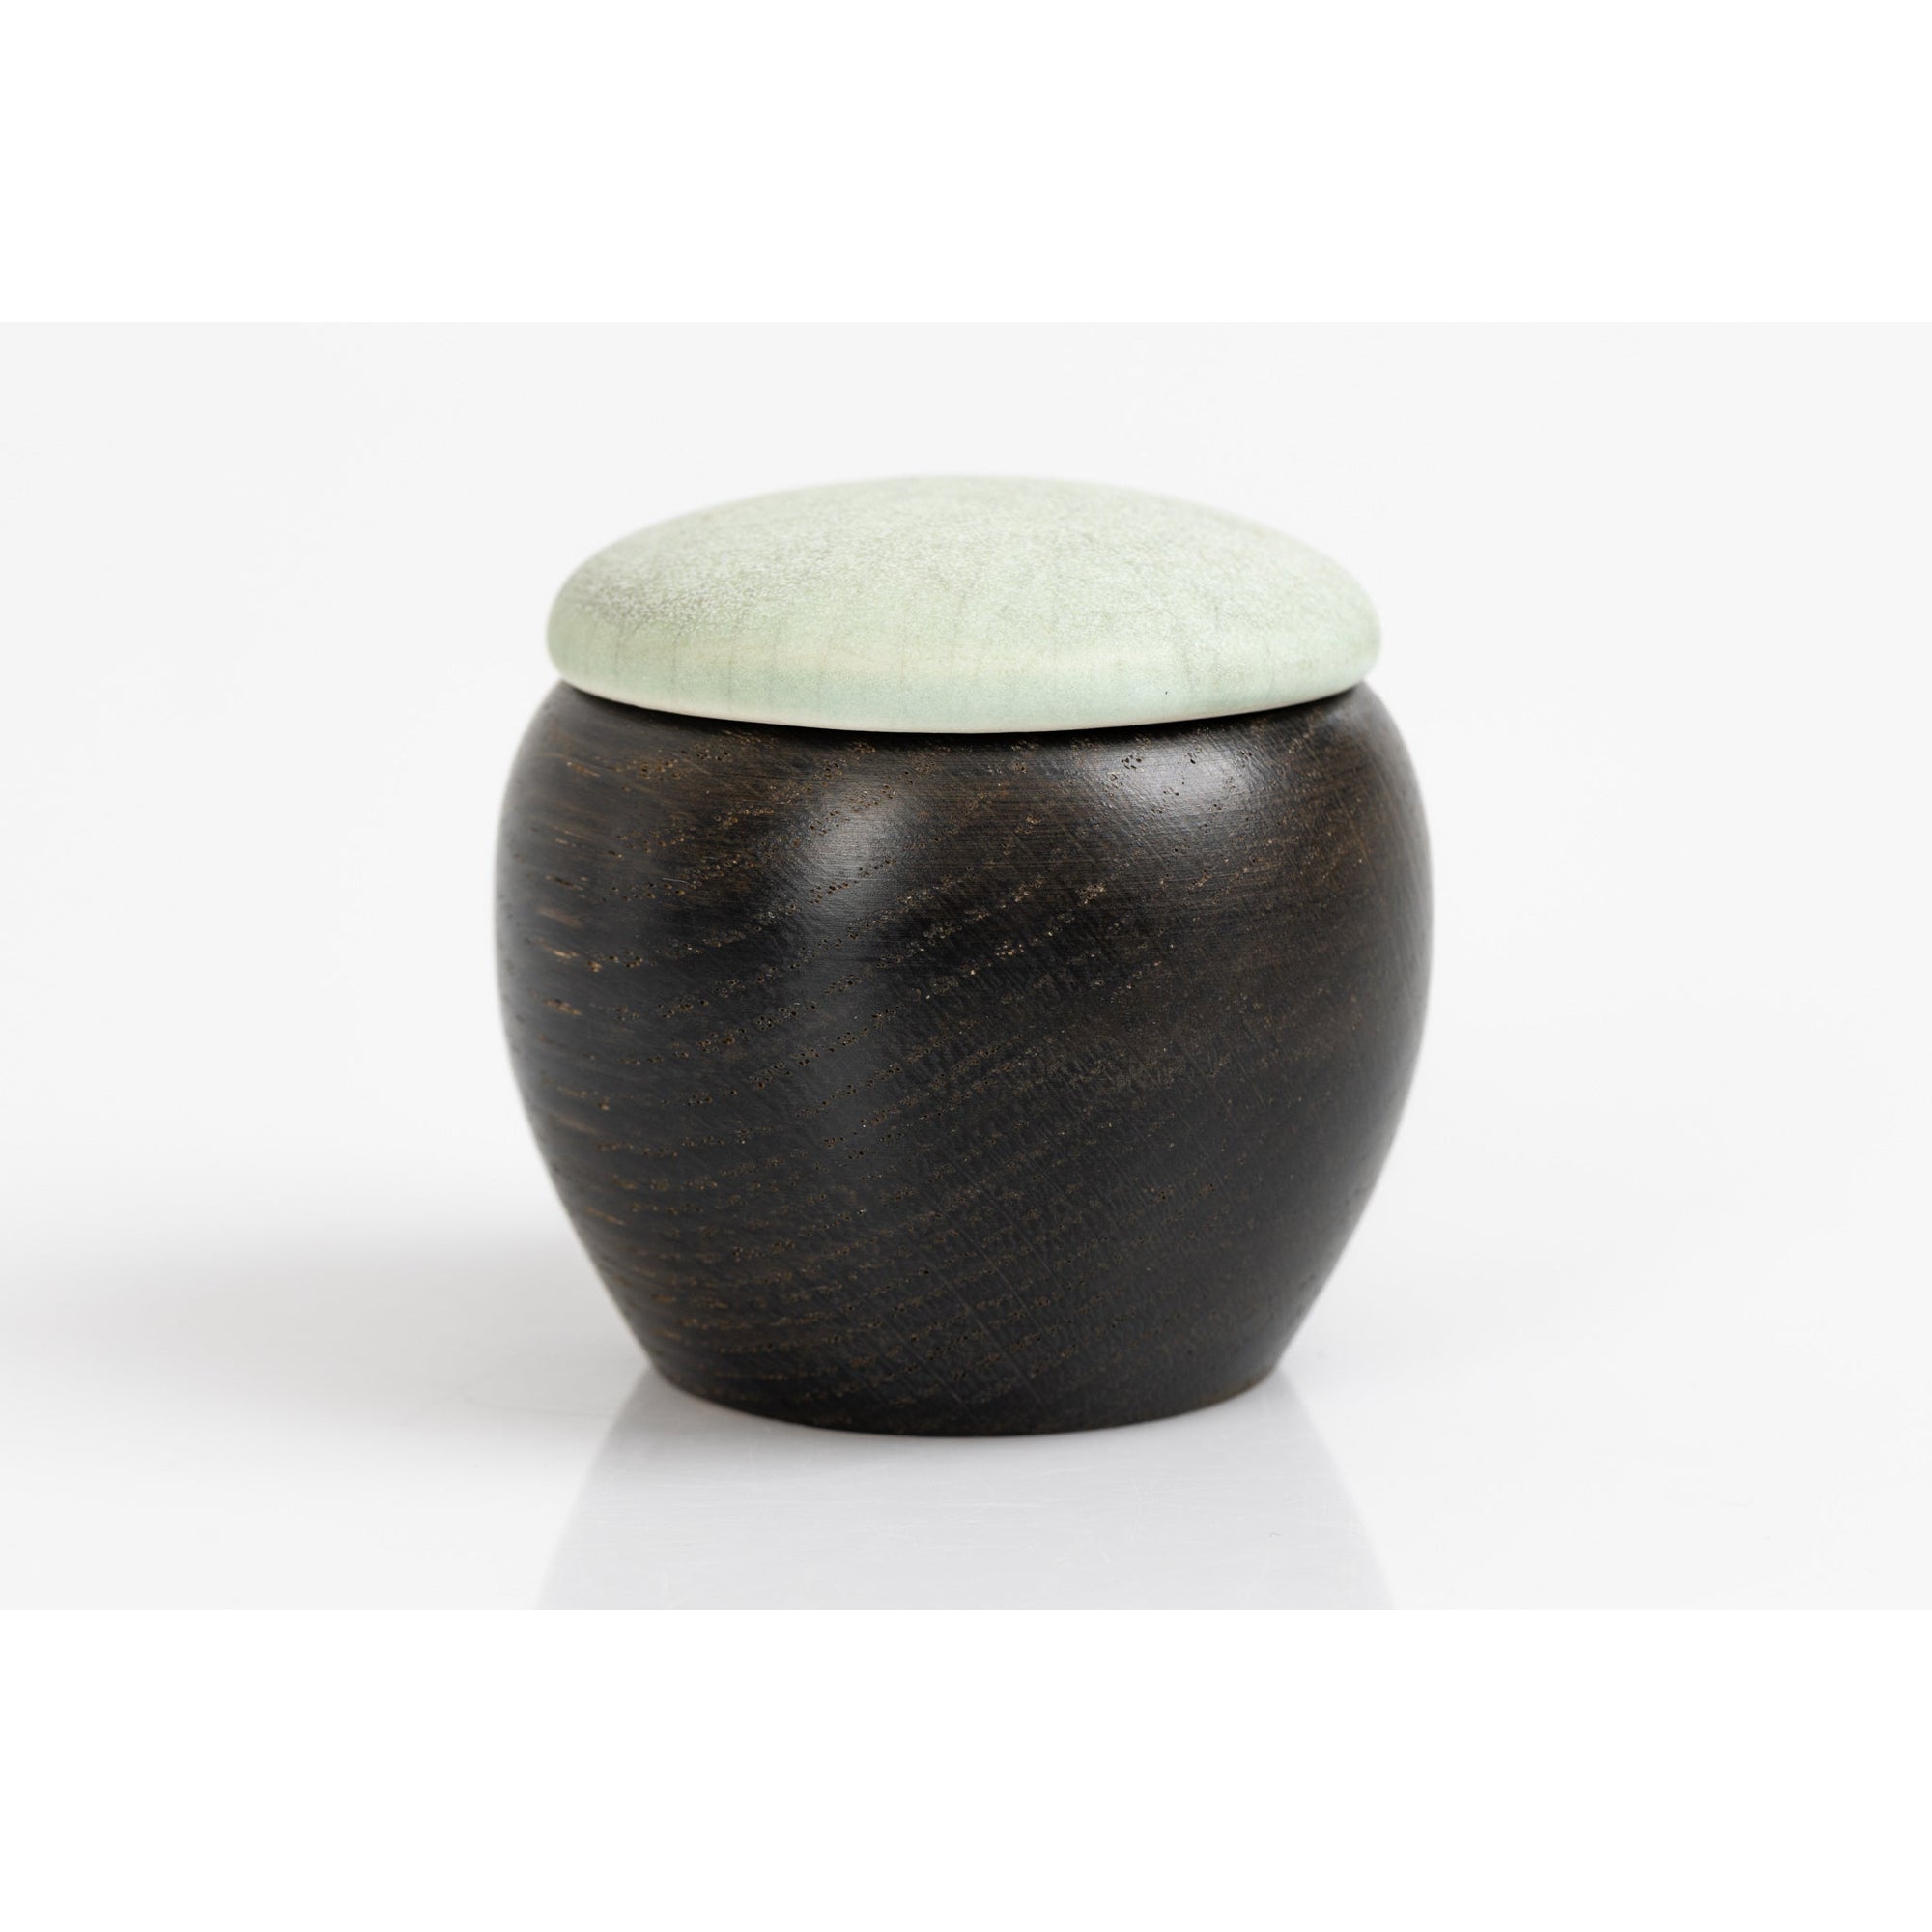 KSL1 Wave Pot by Kate Schuricht, available at Padstow Gallery, Cornwall